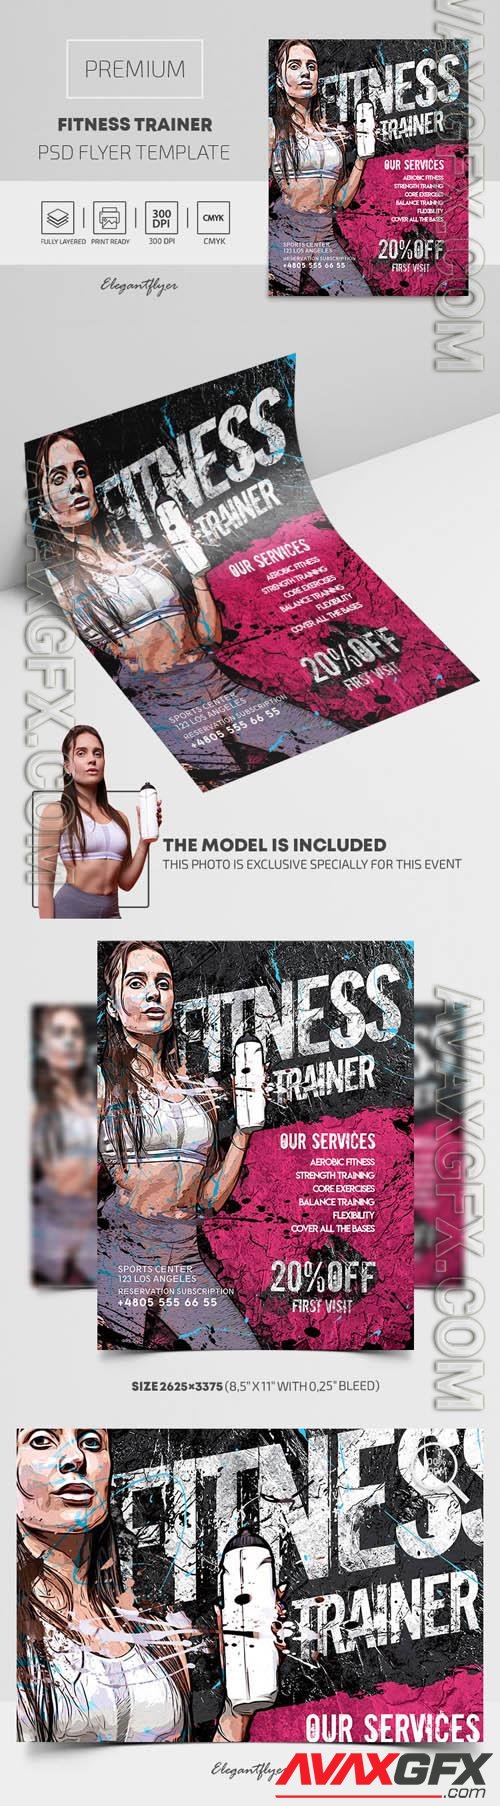 Fitness Trainer Premium PSD Flyer Template